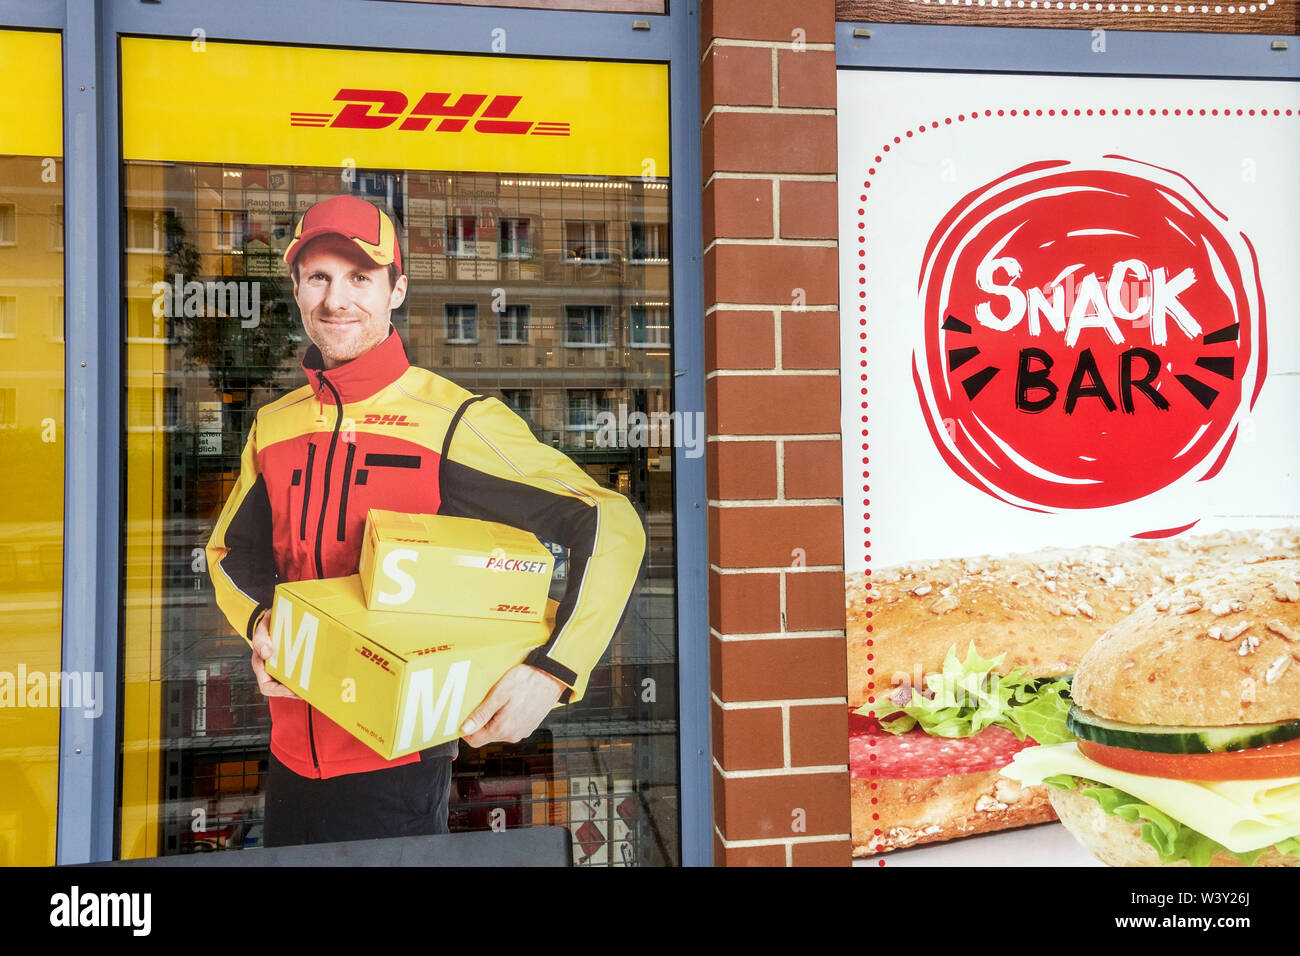 DHL delivery man, an advert on DHL office shop, Snack Bar on street Dresden Germany Stock Photo